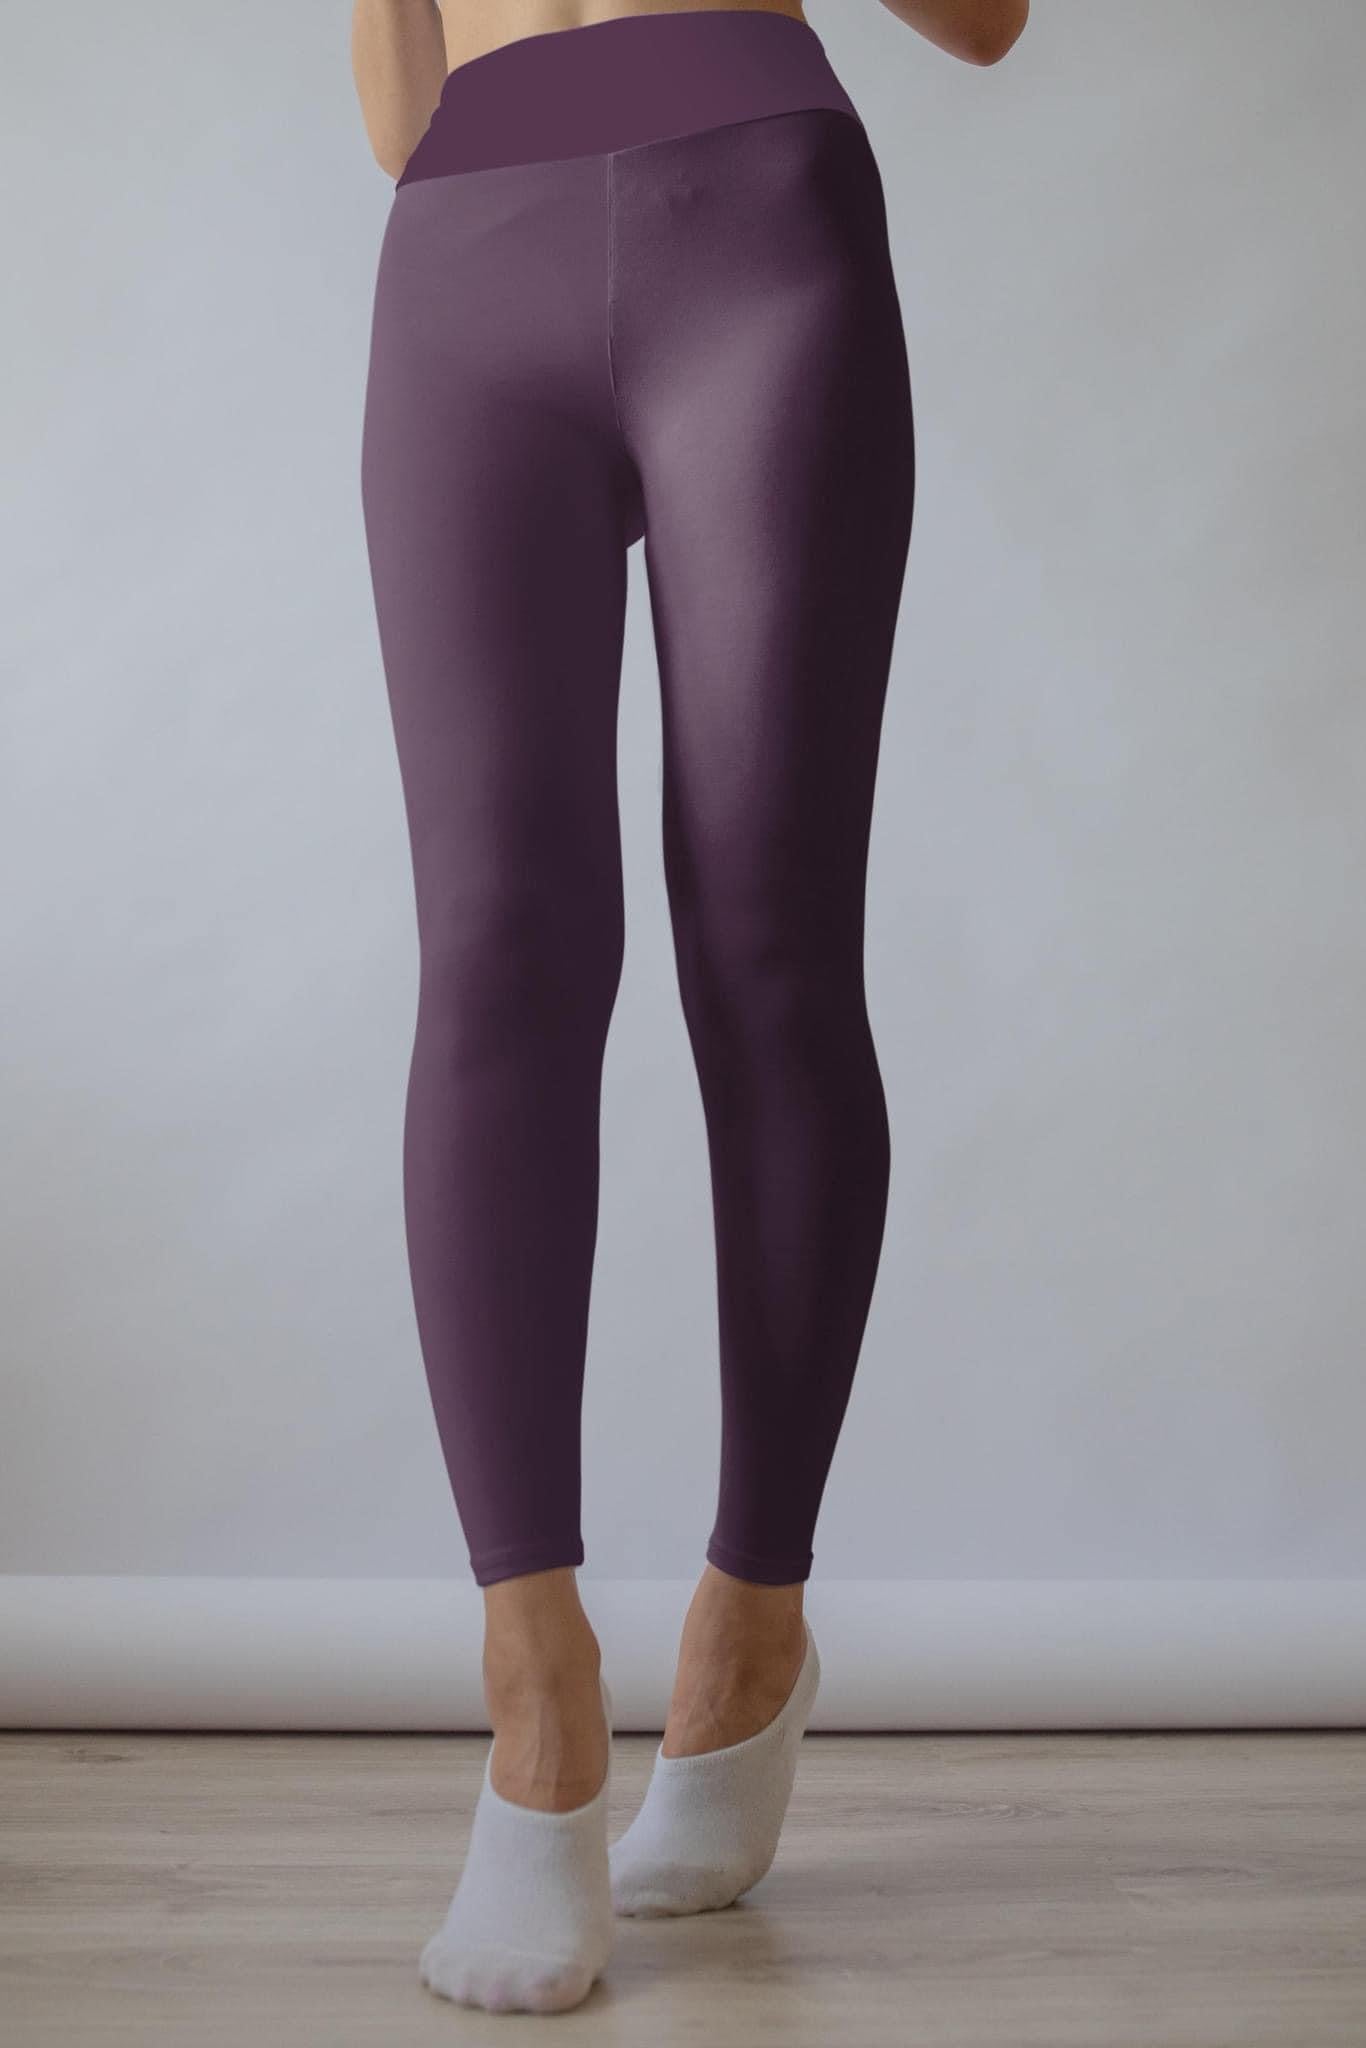 Solid Eggplant Capri Leggings With and Without Pockets